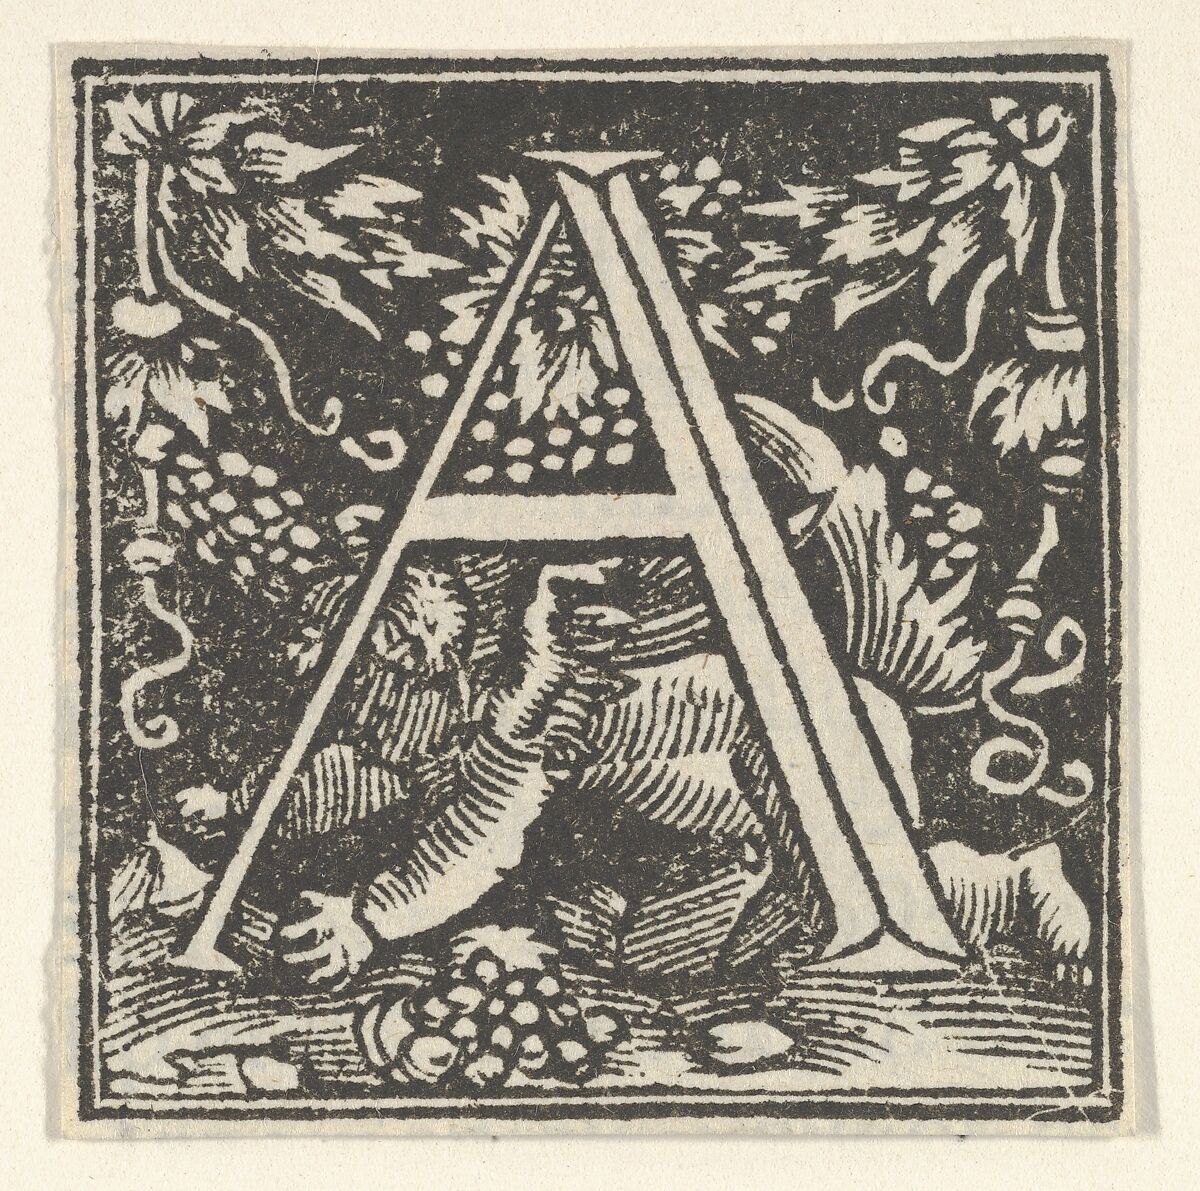 Initial letter A with putto, Heinrich Vogtherr the Elder (German, born 1490, active 1538–1540), Woodcut 